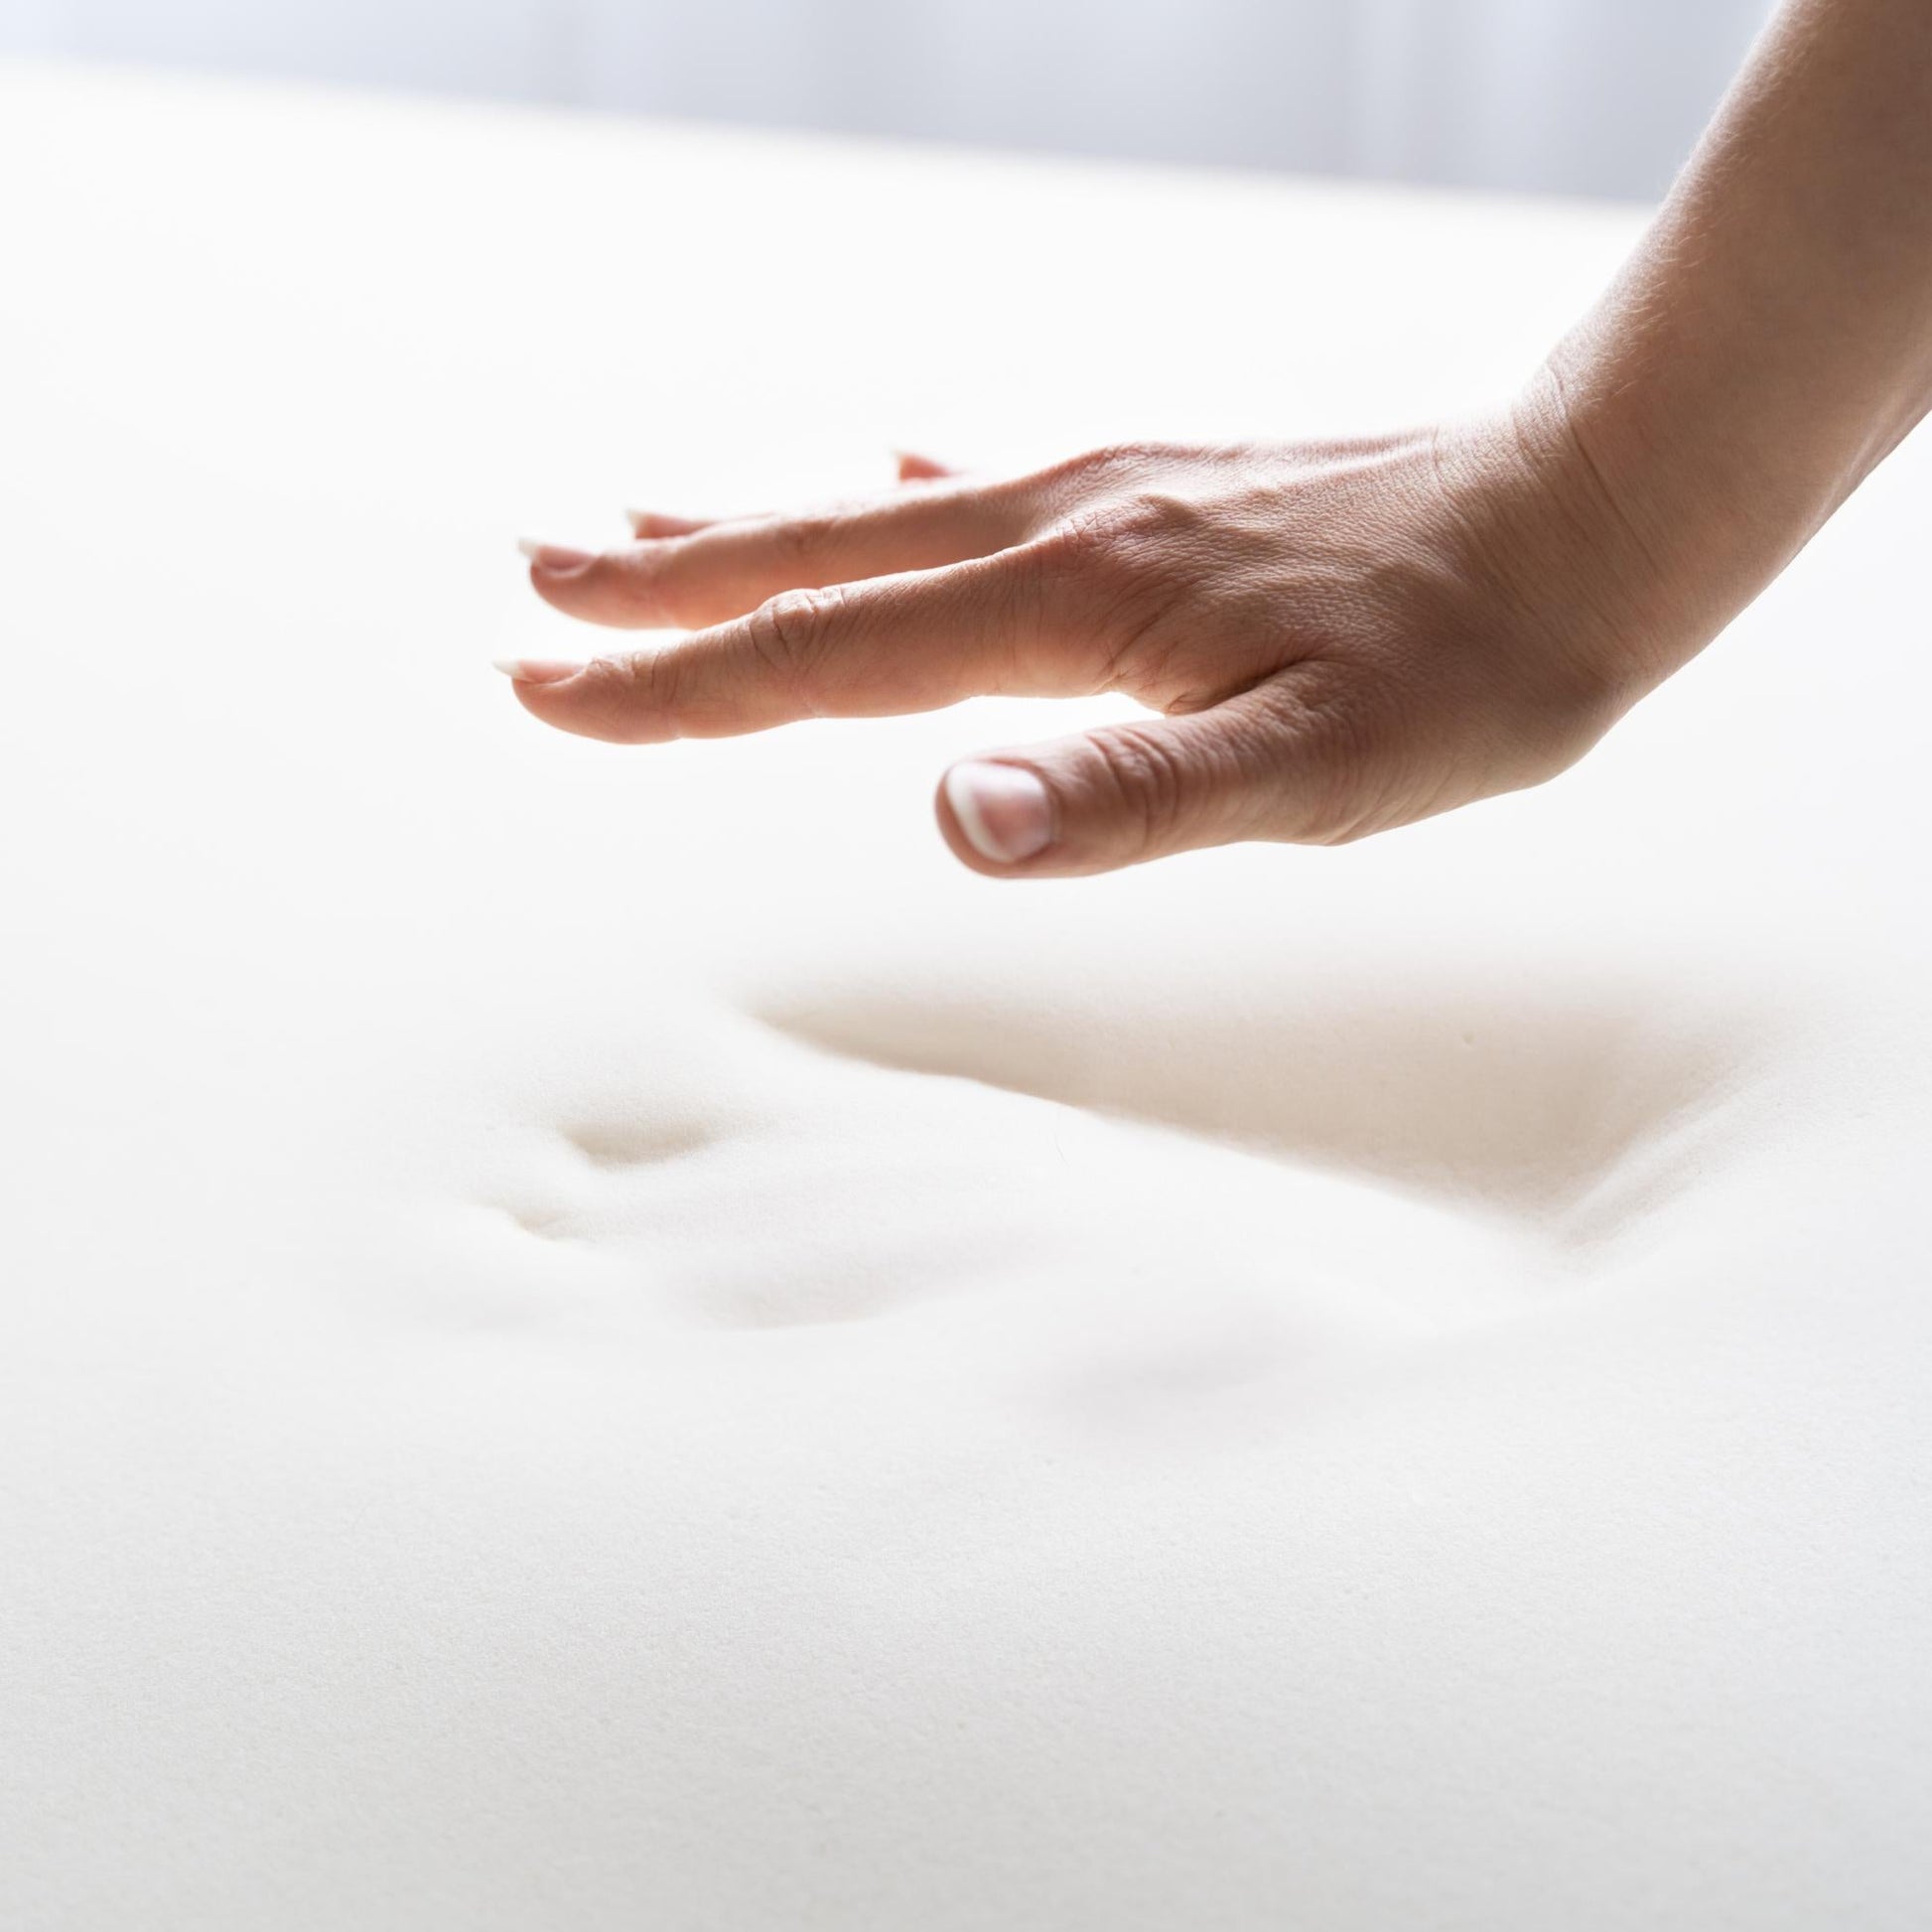 Hand pressing into memory foam, illustrating the supportive comfort it provides for caravan mattresses.